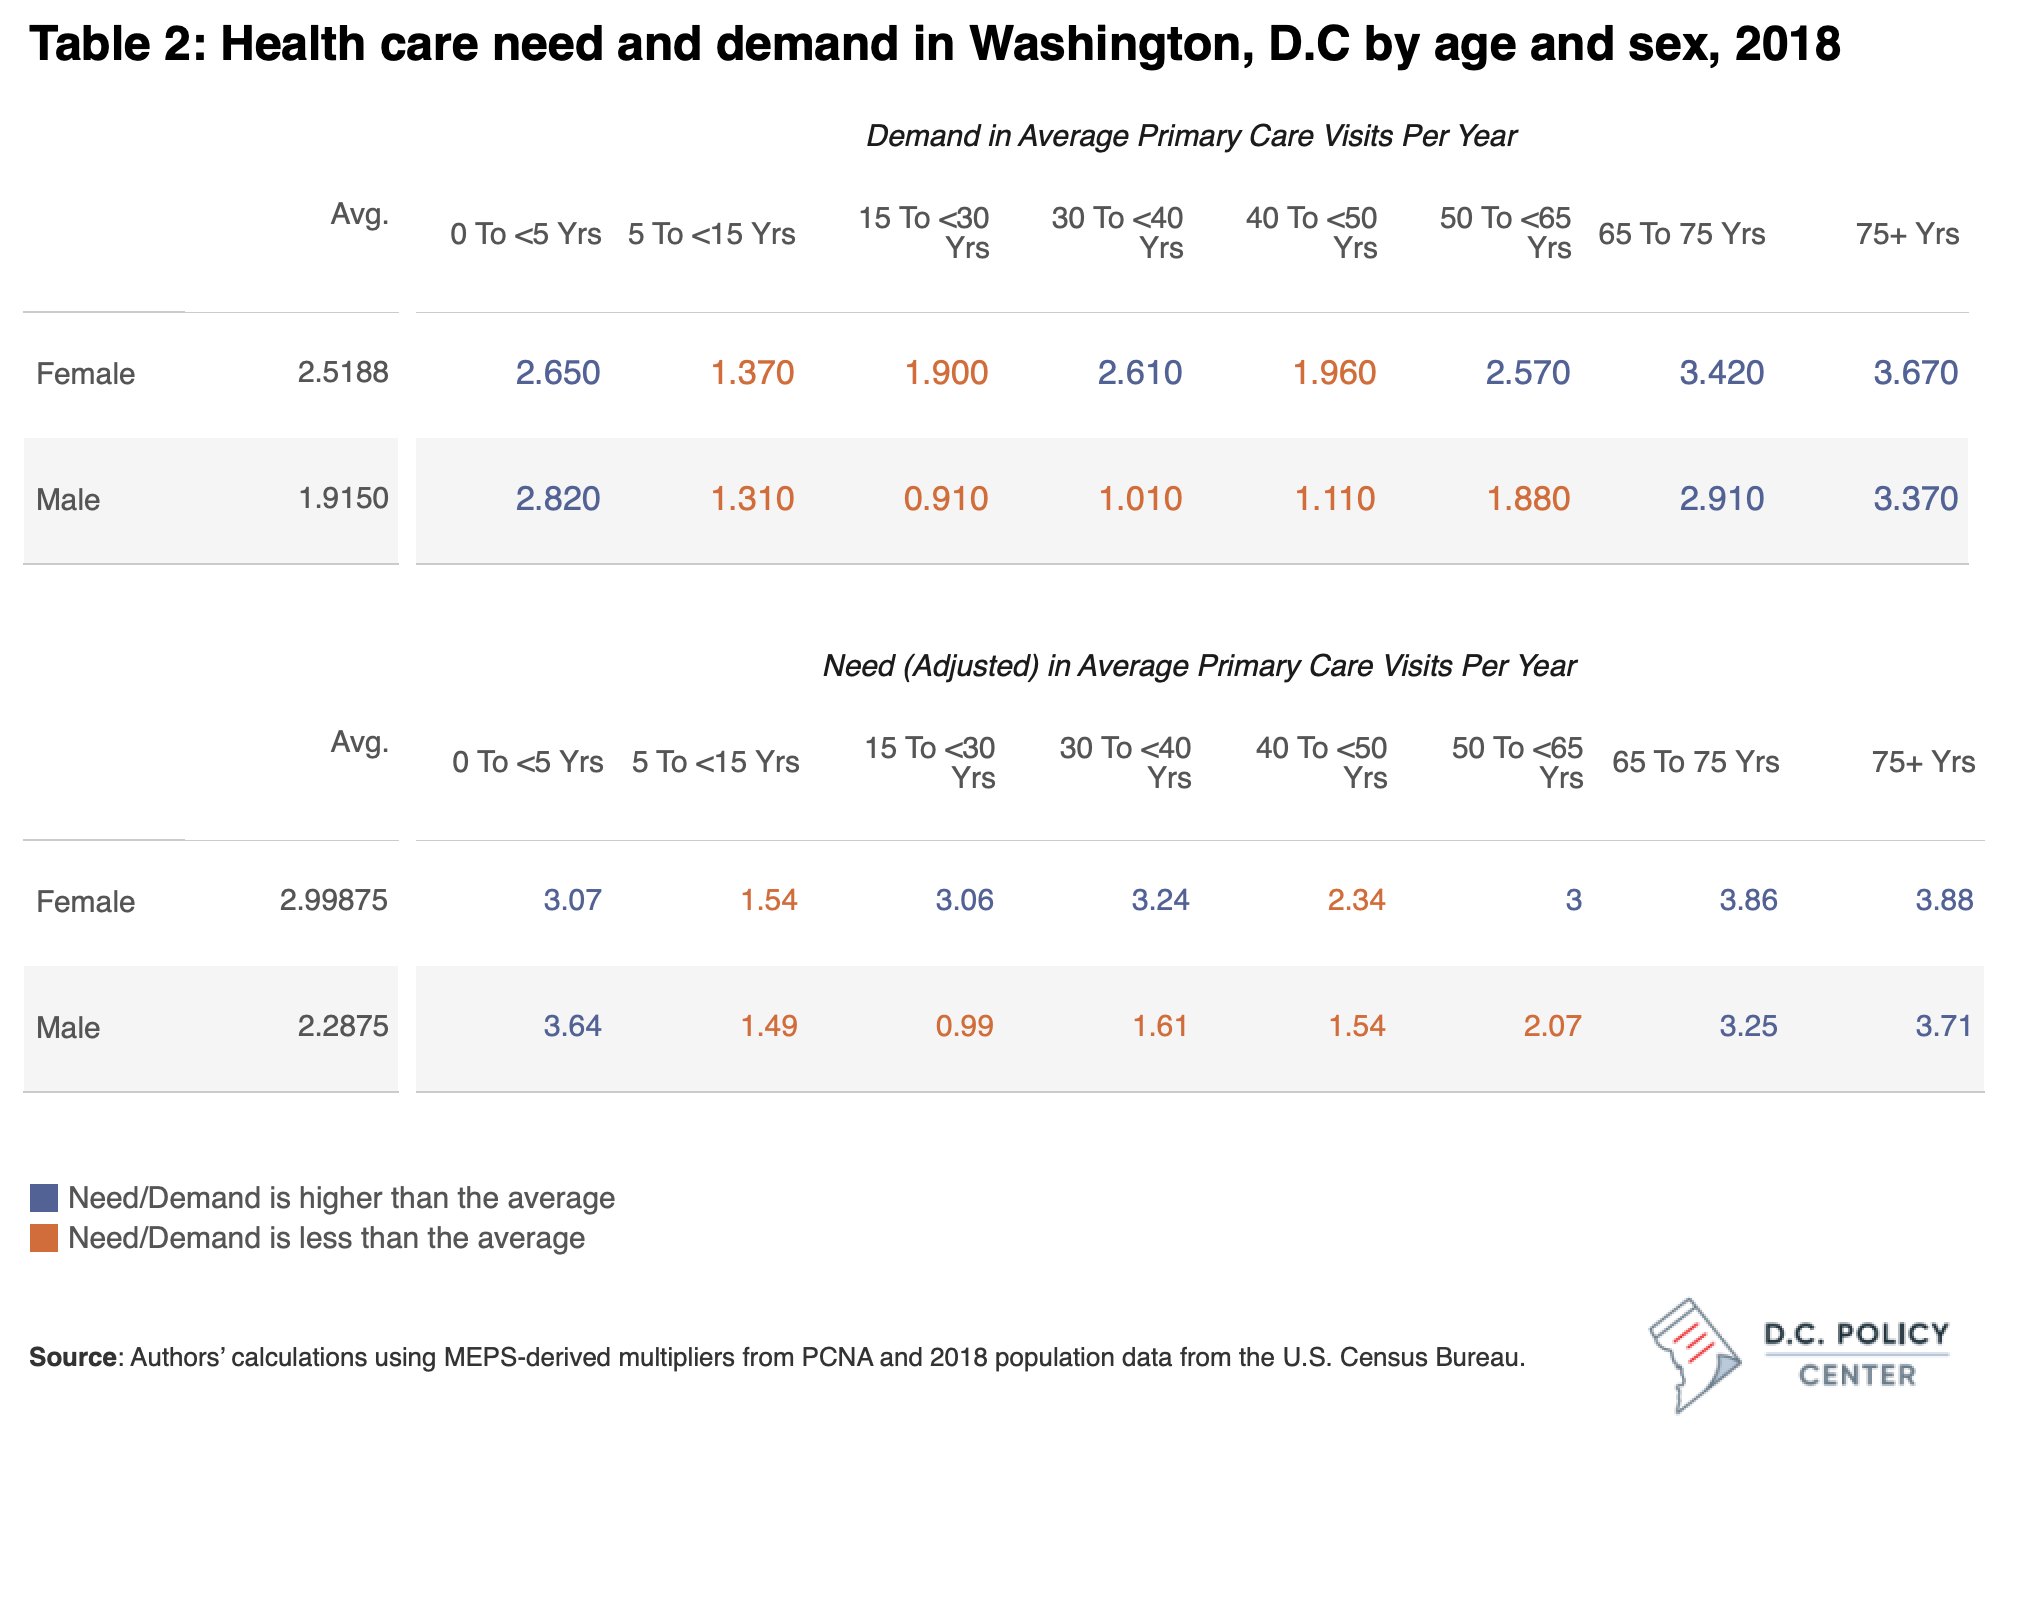 Table 2. Health care need and demand by age and sex, 2018